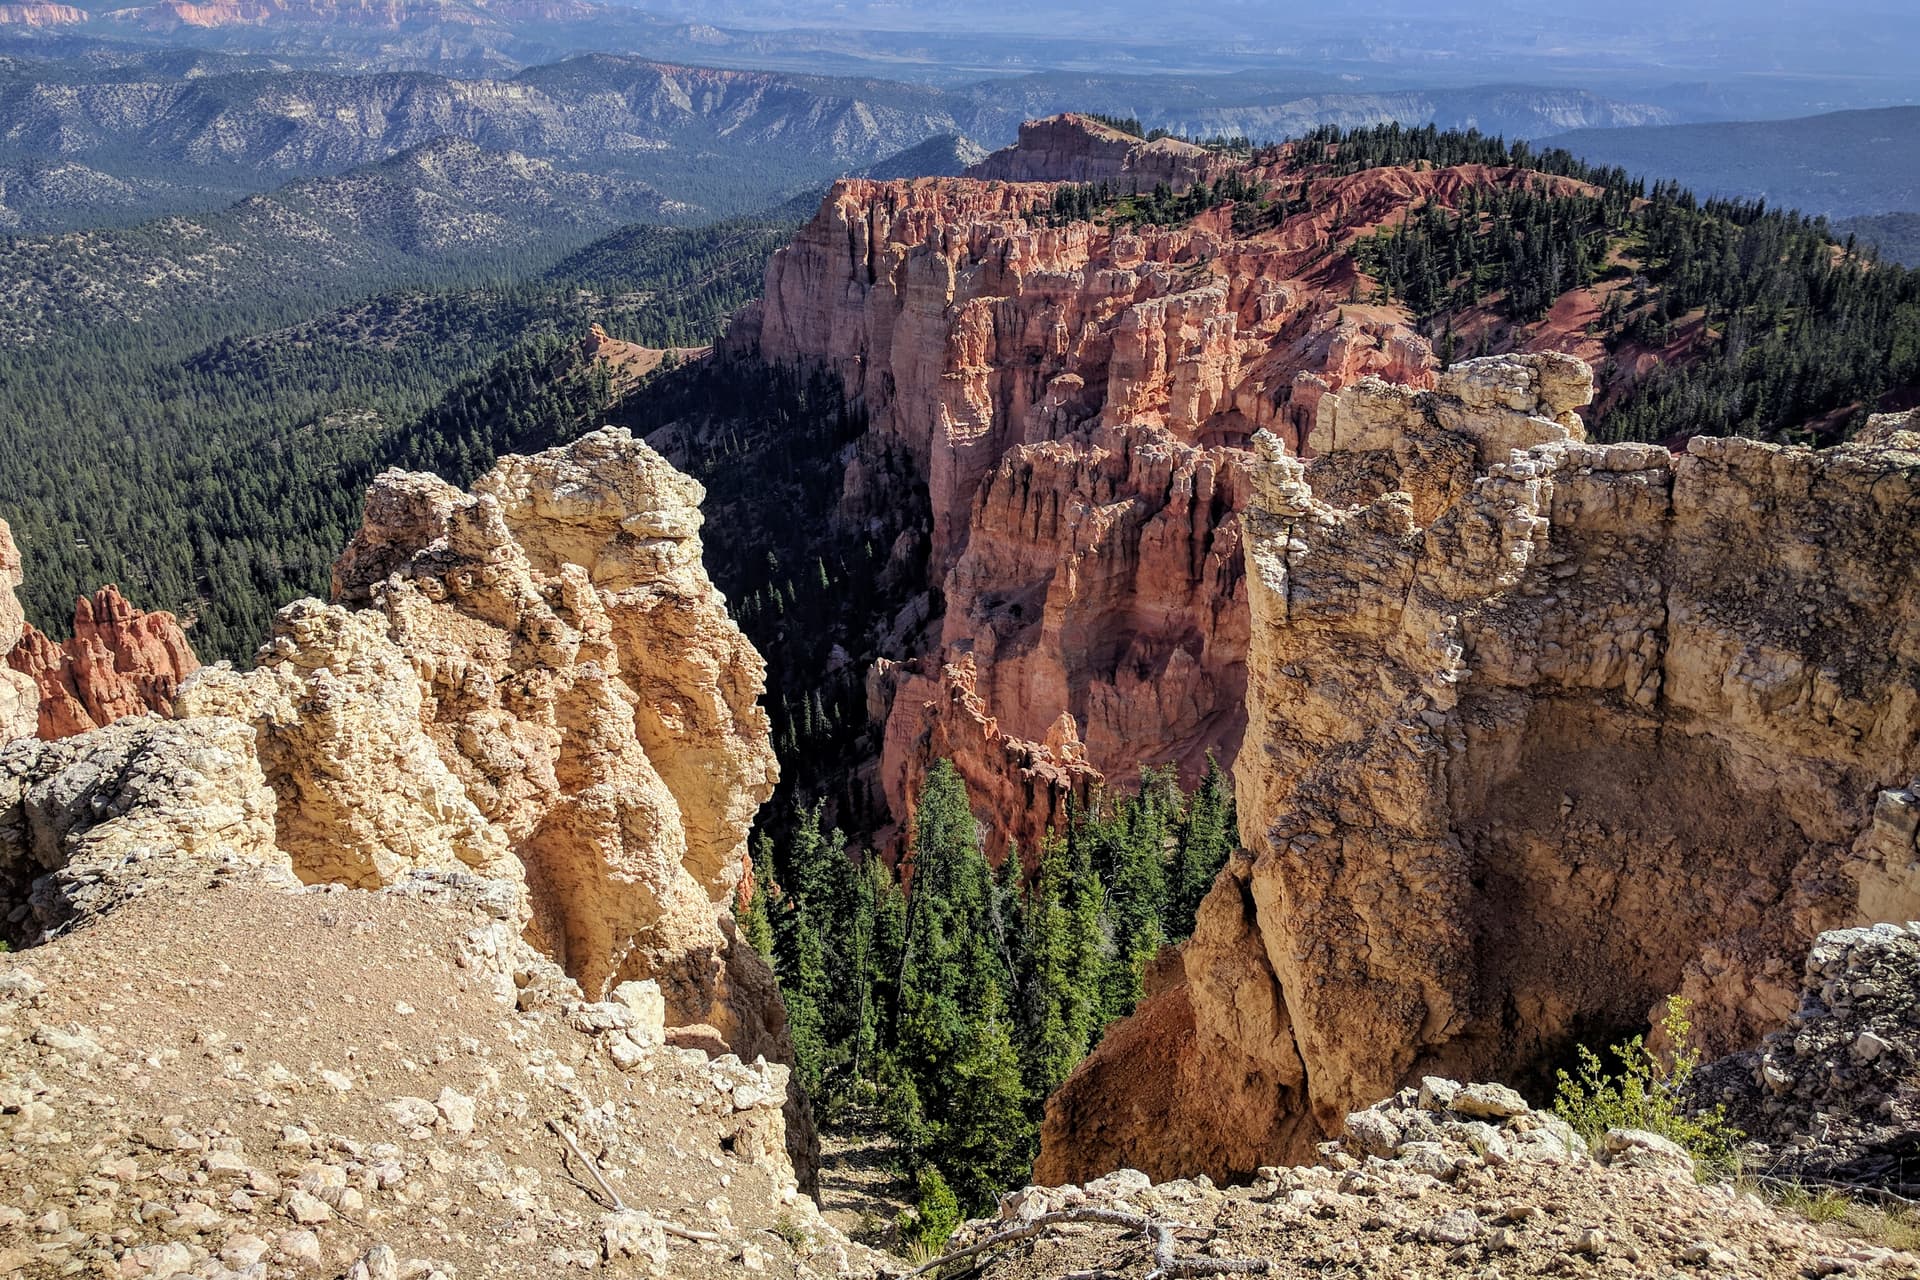 The South Wall of Bryce Canyon. Red and white pillars of soft rock cluster together, eventually becoming the rim of the Canyon. The pillars stop abruptly, and are immediately replaced by a pine forest.